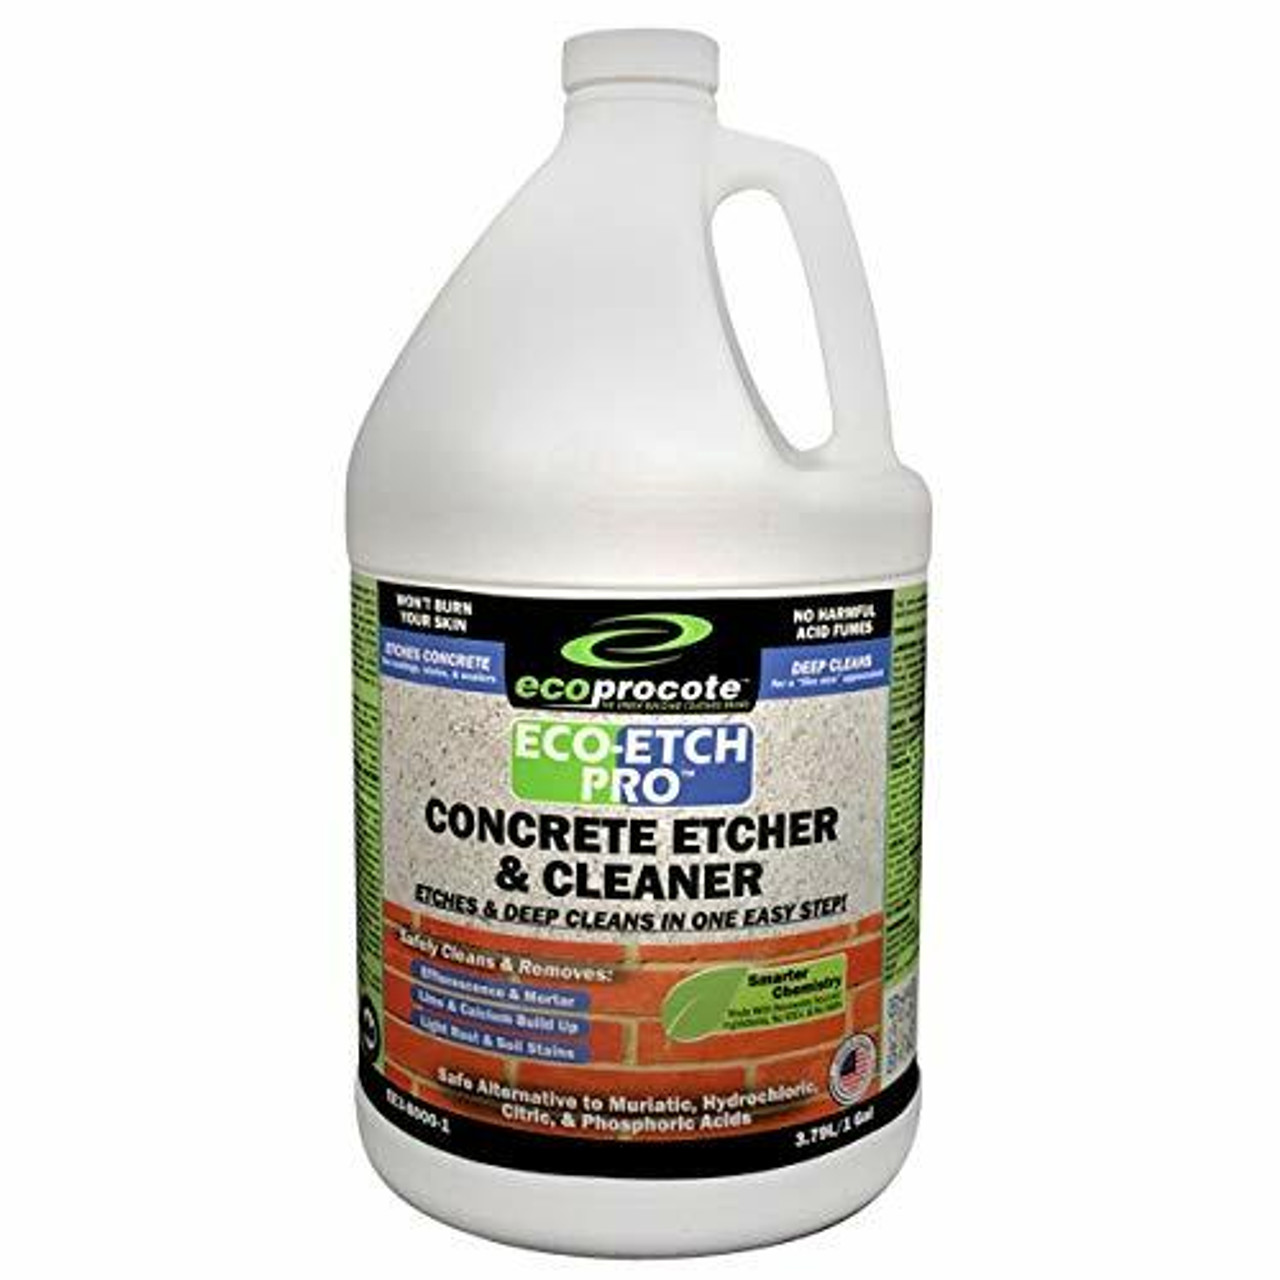 Eco-Etch Pro Concrete Etcher, Concrete Cleaner, Efflorescence Remover, No  Fumes, Will Not Burn Skin - Safer Than Muriatic Acid, Will Not Harm  Vegetation, 1 Gallon